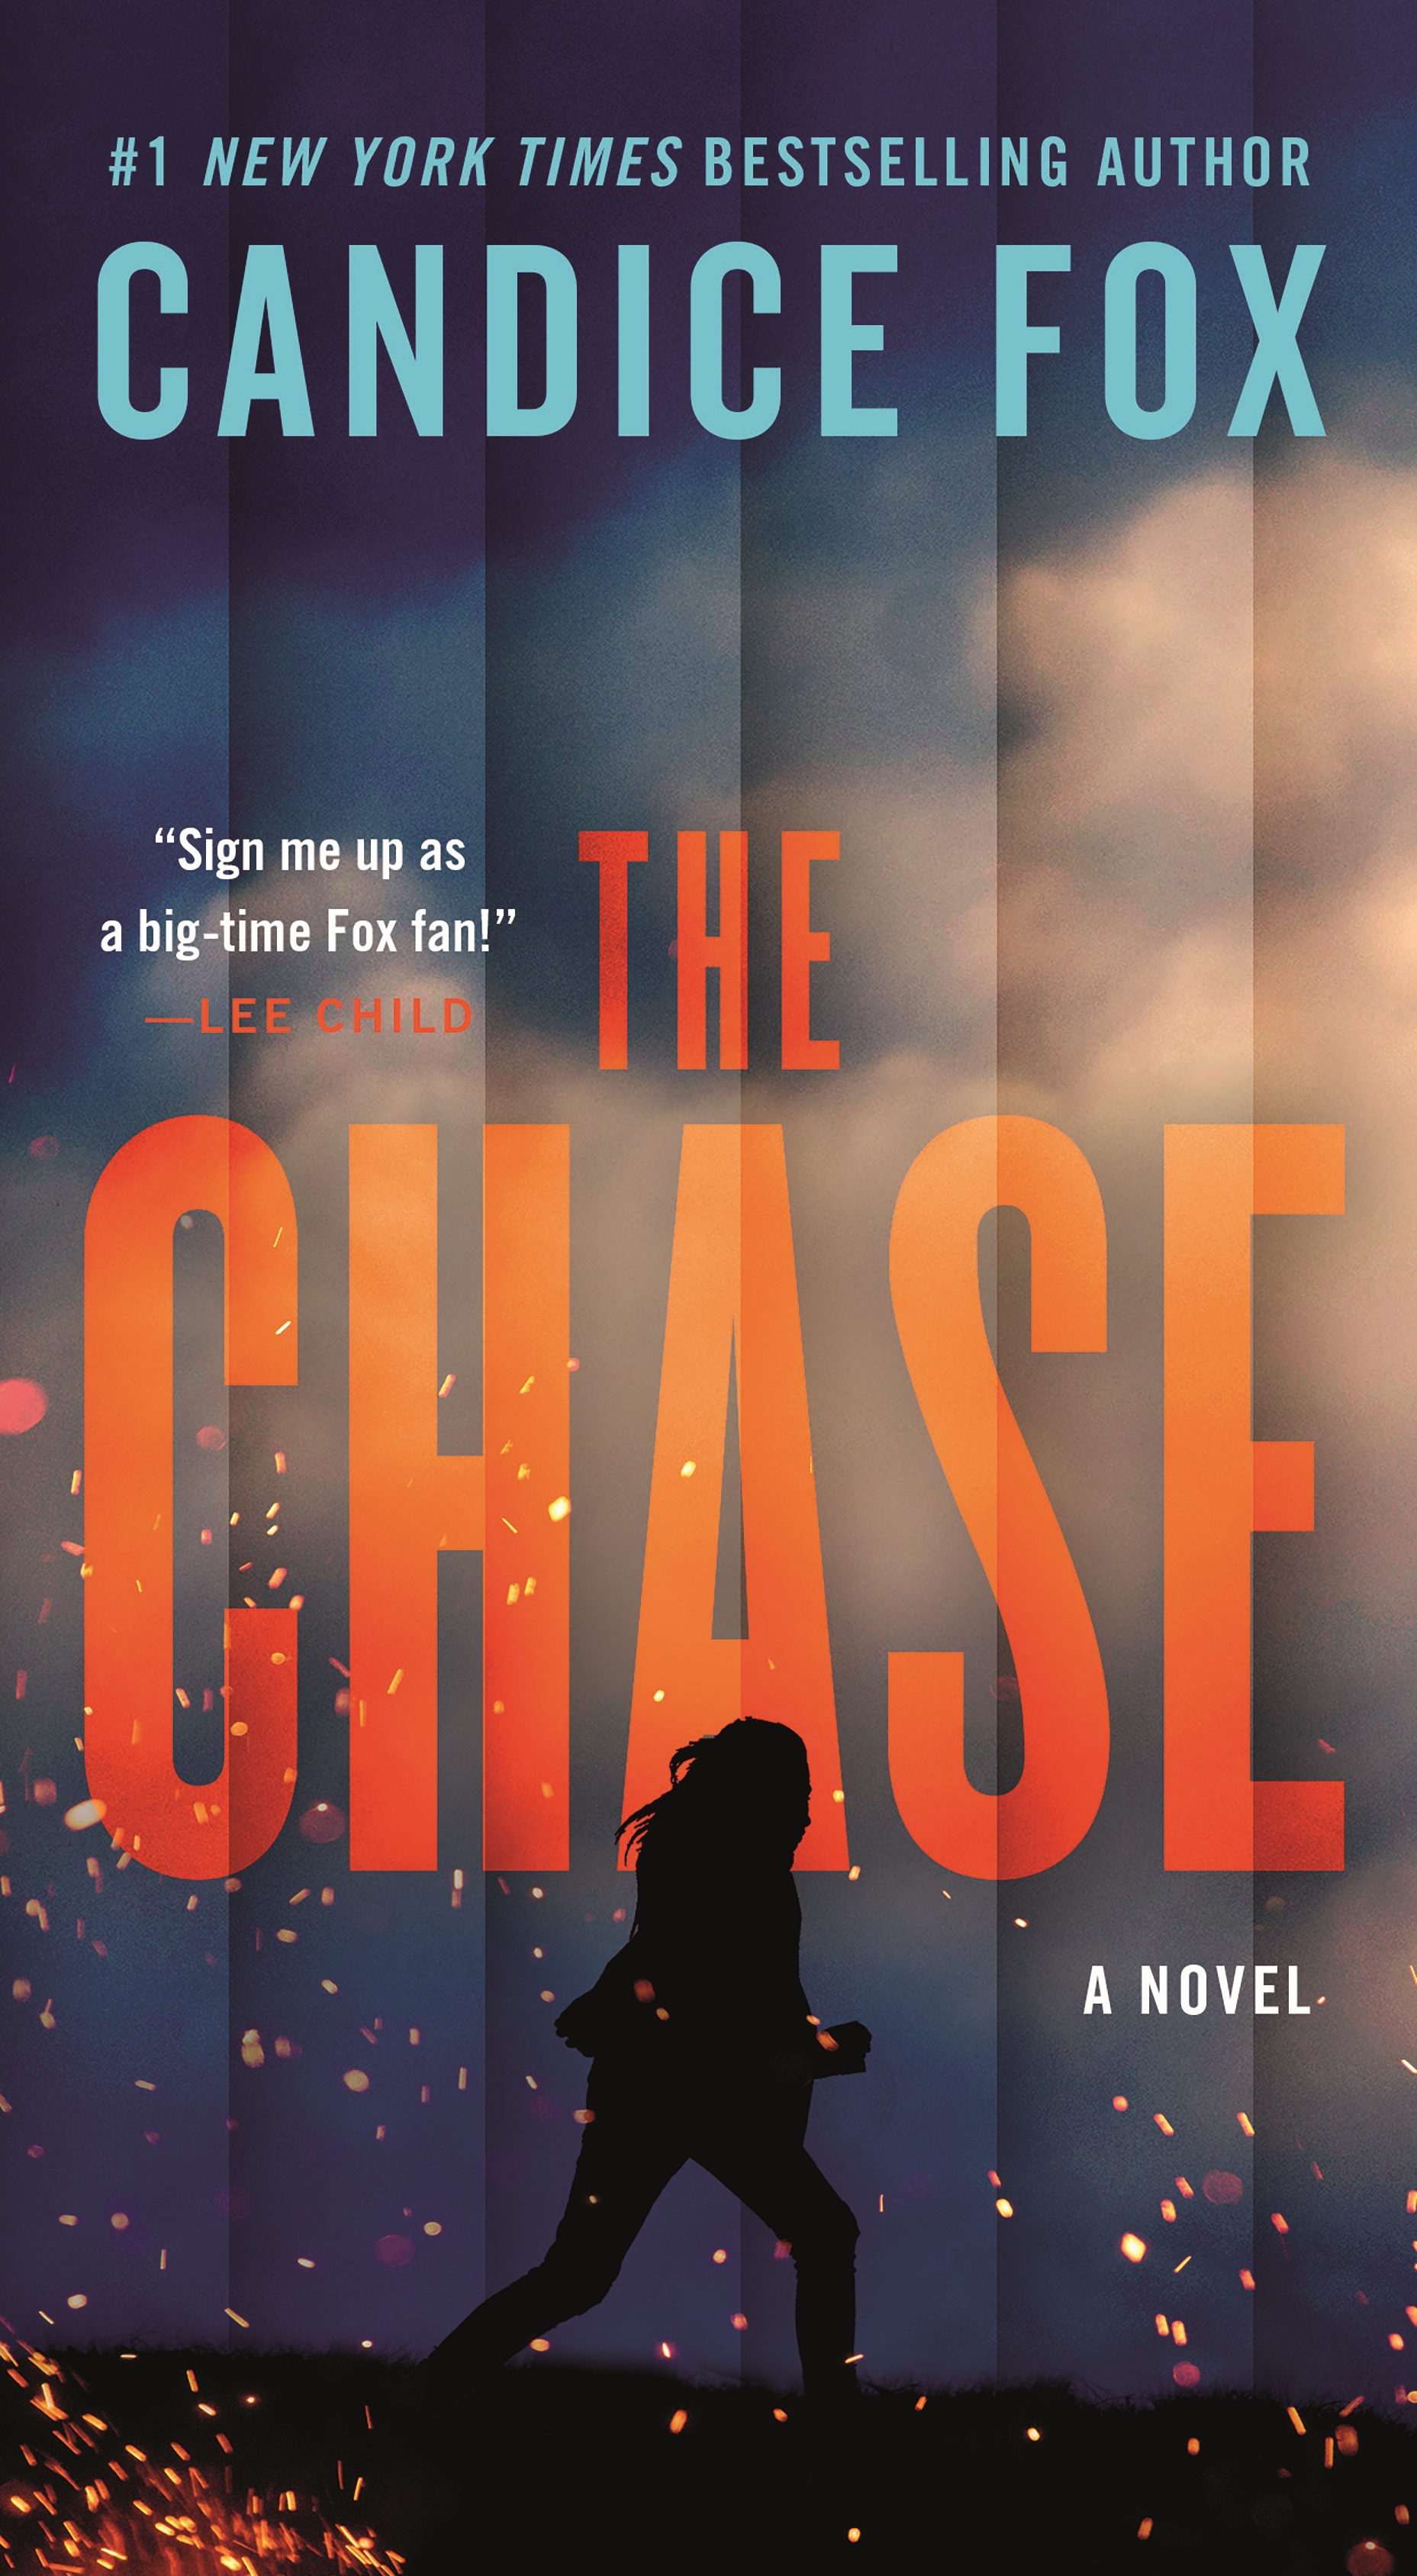 The Chase by Candice Fox